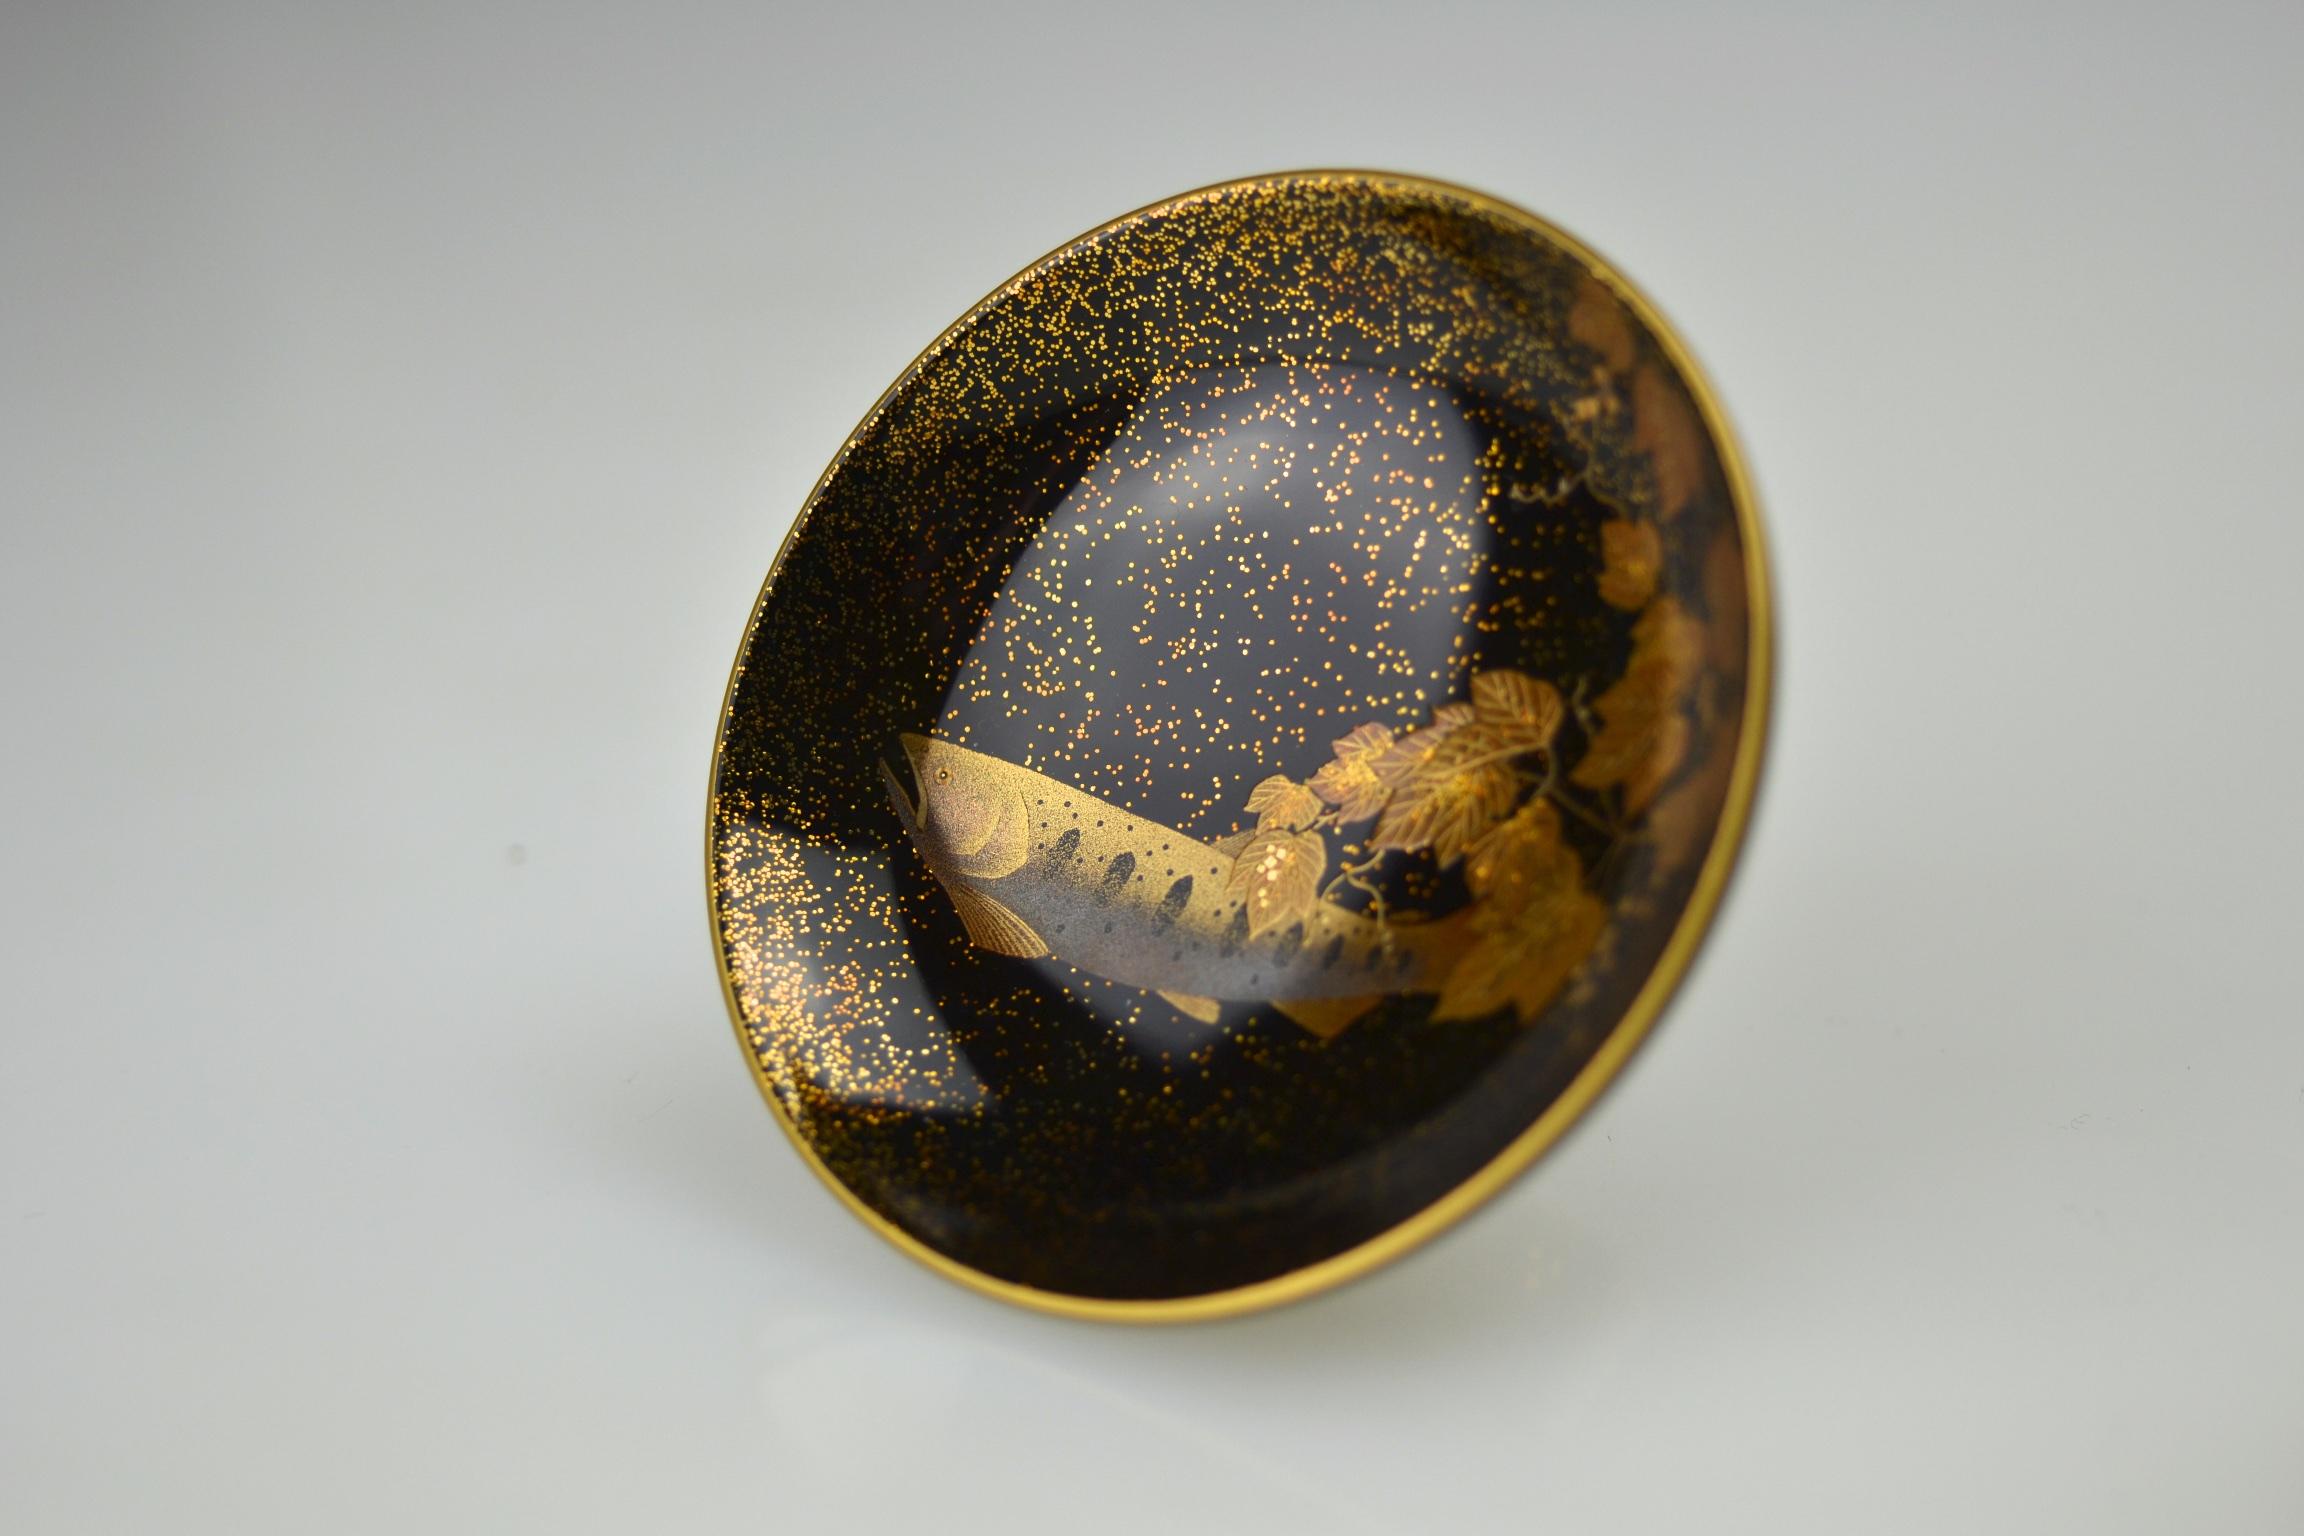 Beautiful little Sake cup (sakazuki) made by one of the most talented and well known current lacquer artists Uchino Kaoru (*1951). Born in Nagoya, he graduated from Tokyo University of Arts, where he comleted his master degree in 1980 as well. Since